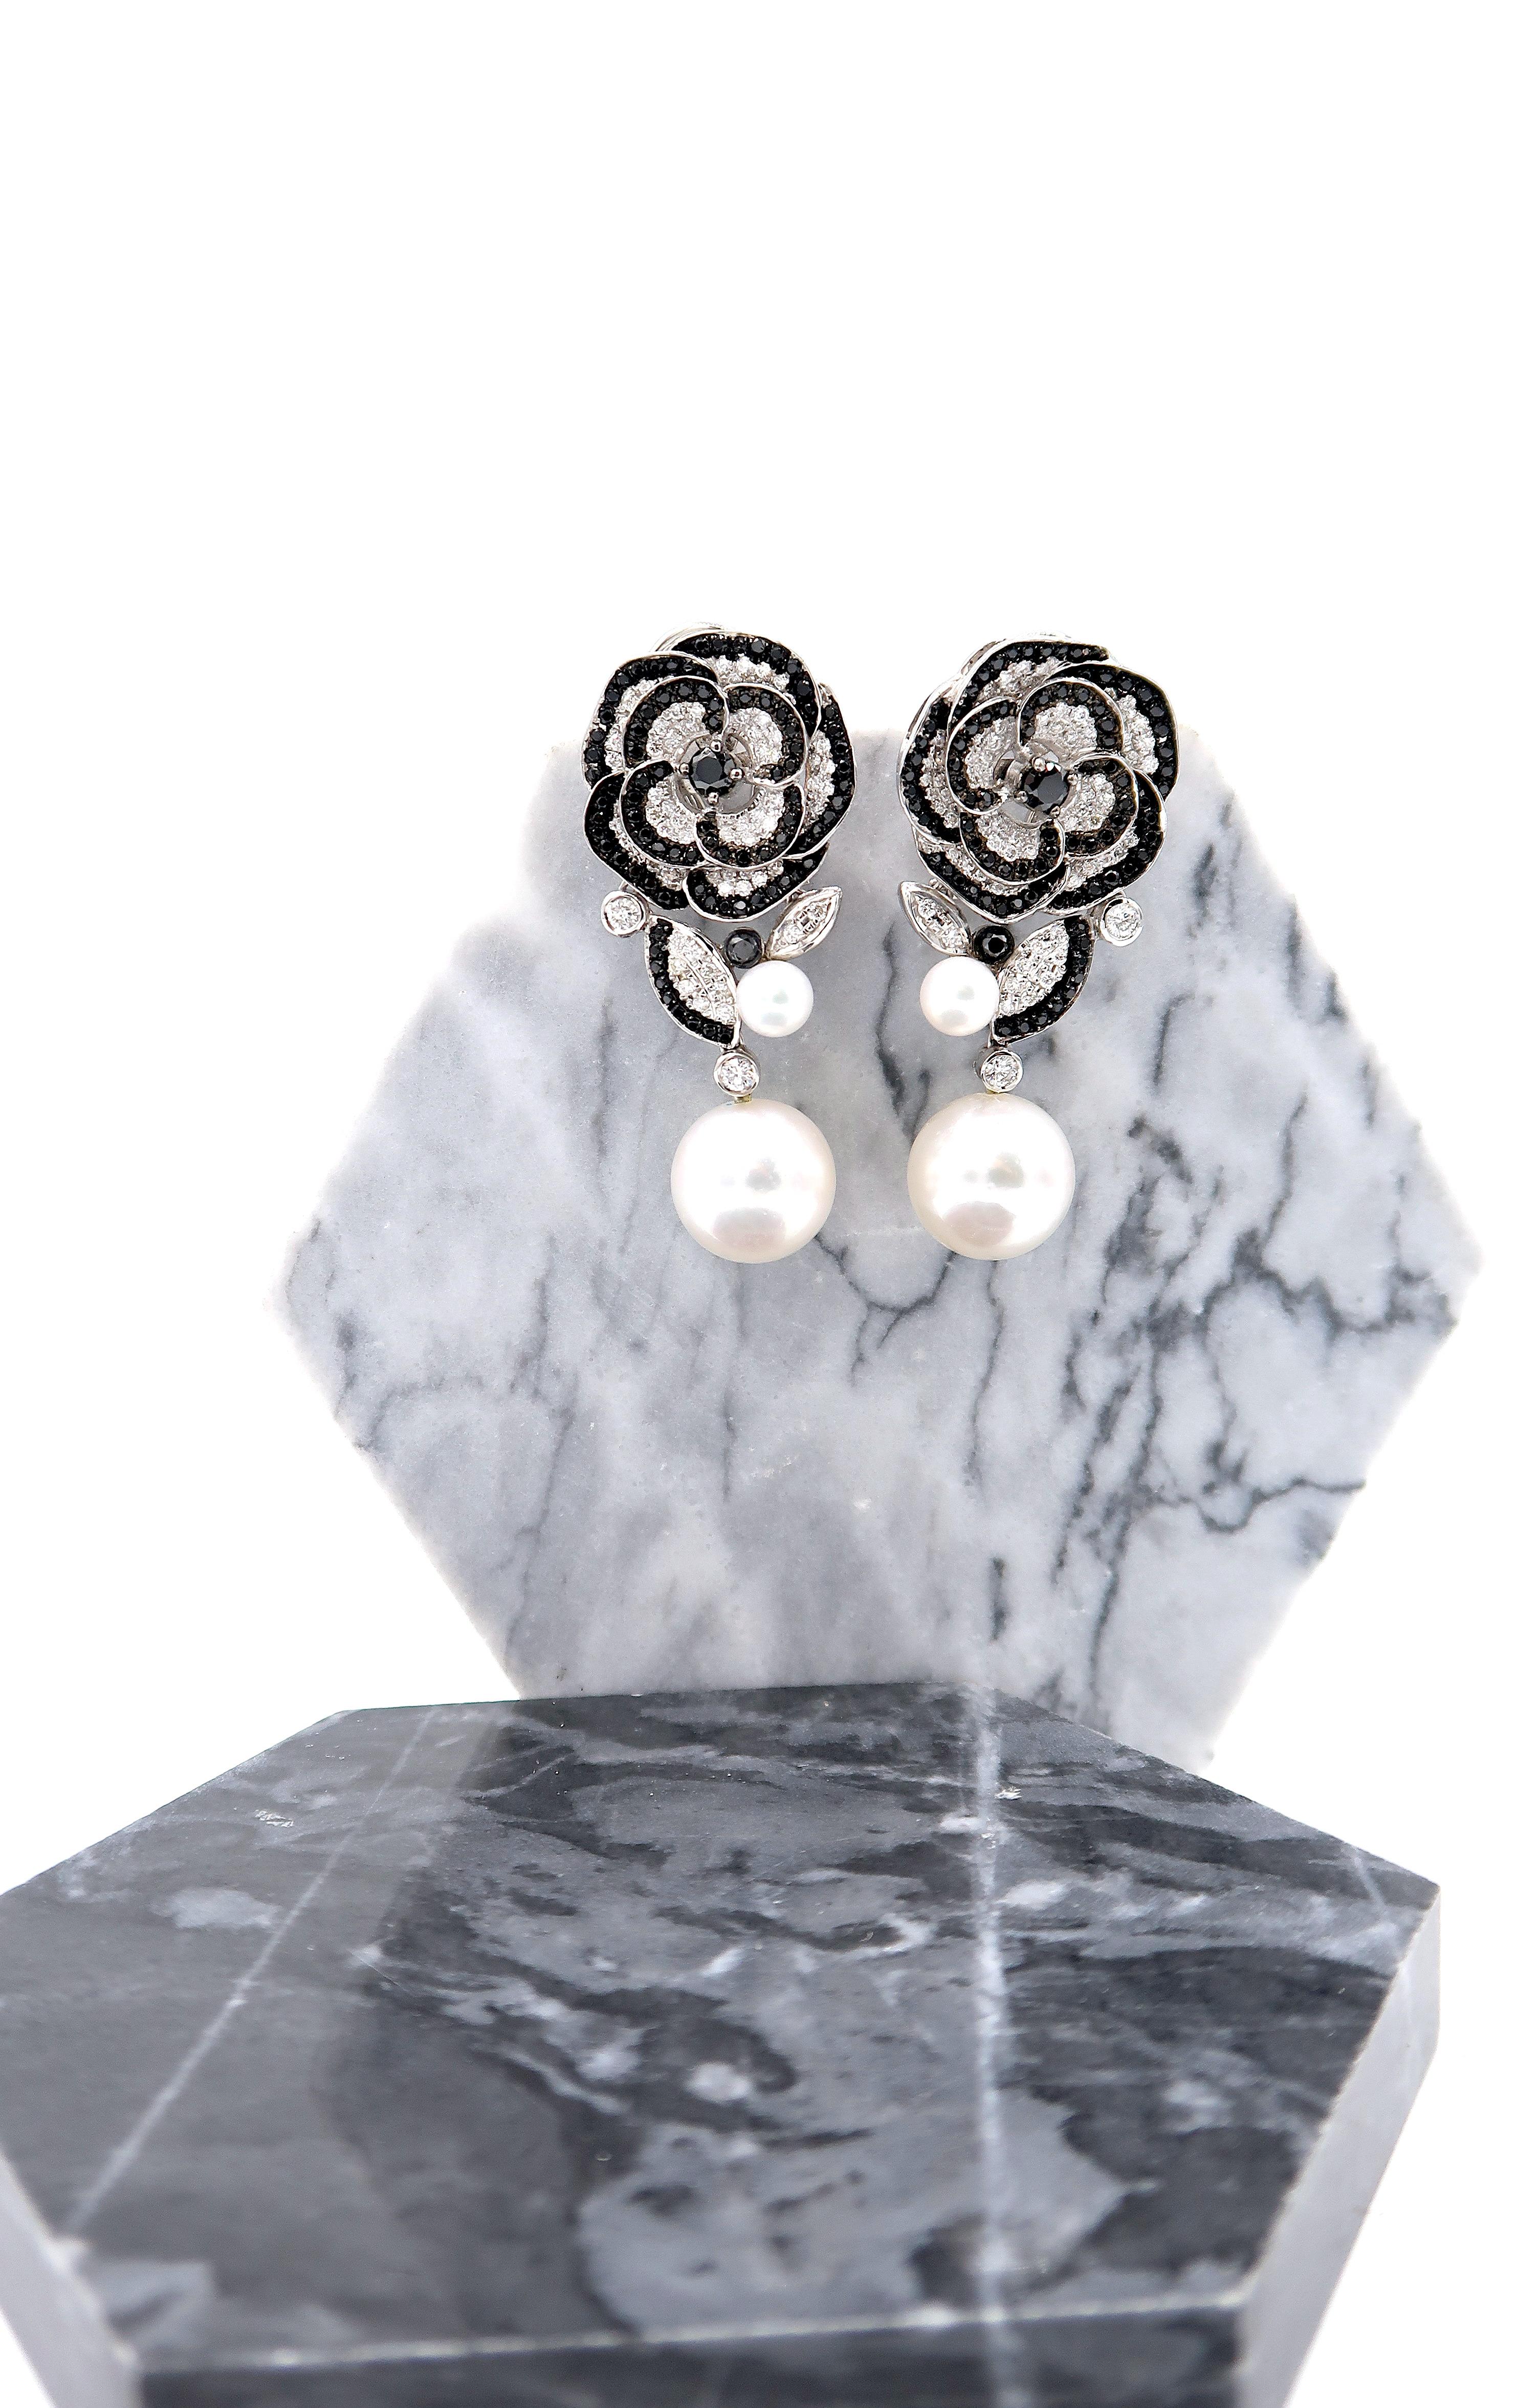 Black and White Diamond South Sea Pearl Floral Long Earrings in 18 Karat White Gold

Gold: 18K 24.91g.
Black Diamond: 2.54cts.
Diamond: 1.14ct.
South Sea Pearls

Length: 1 7/8 inches
Width: 7/8 inches